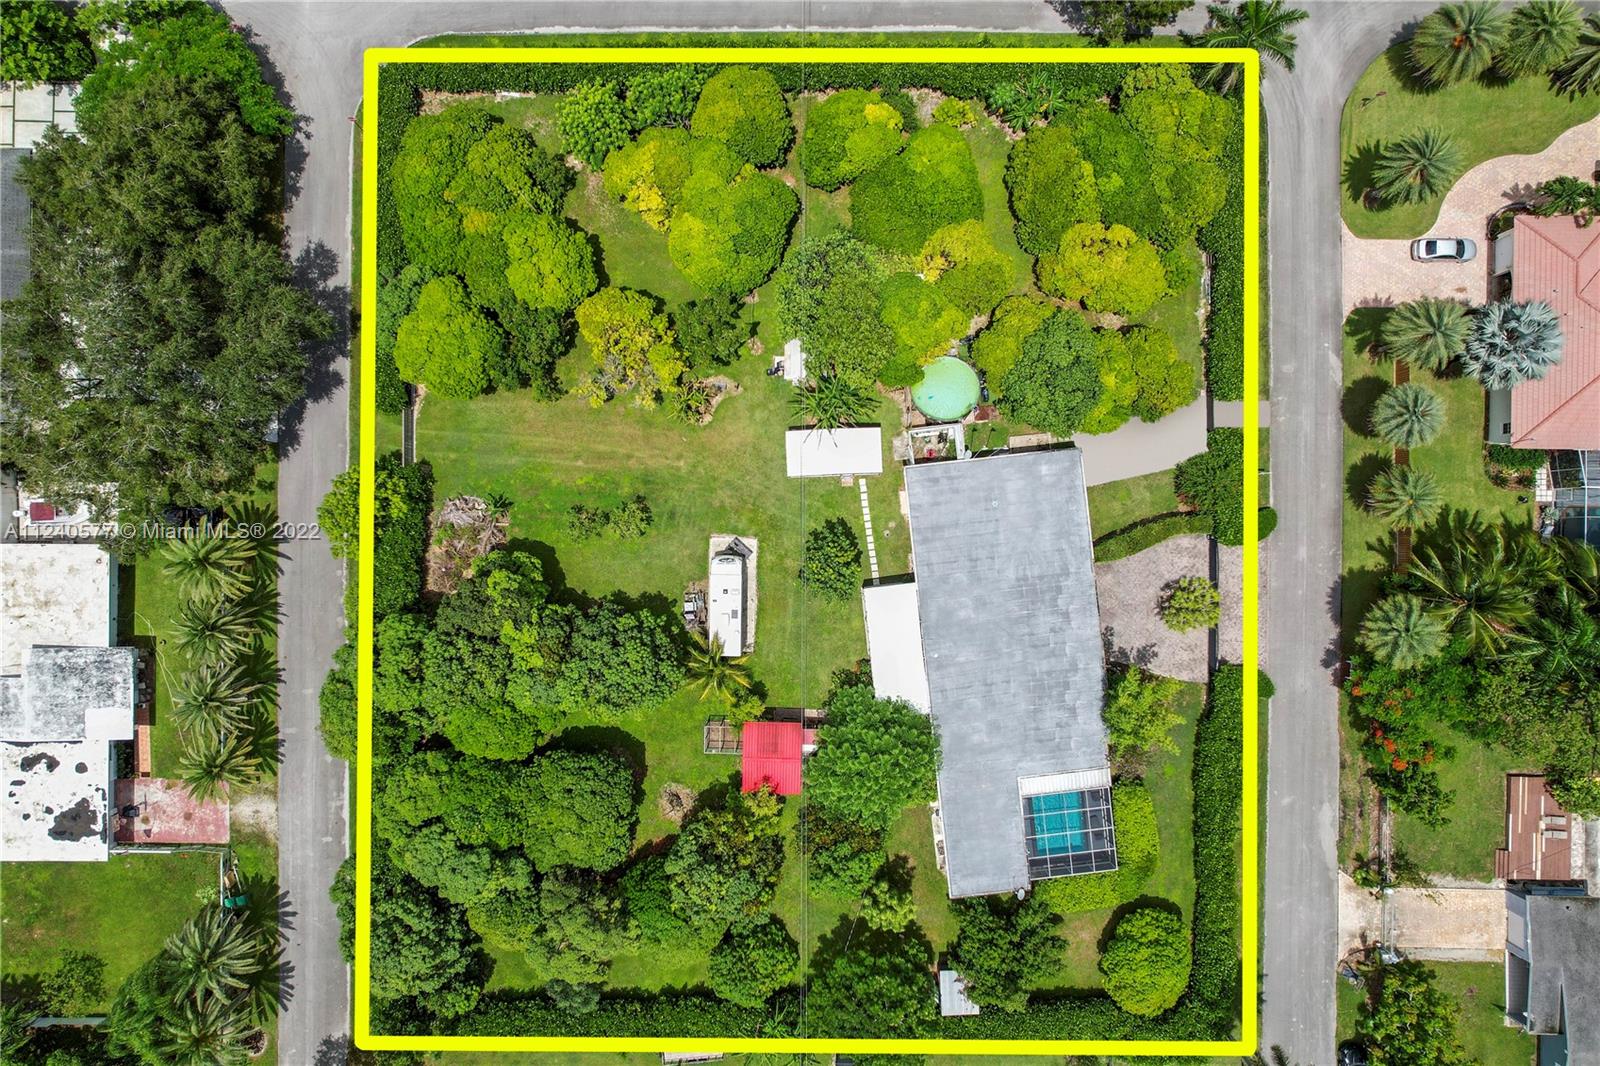 an aerial view of a brick house with a yard and plants